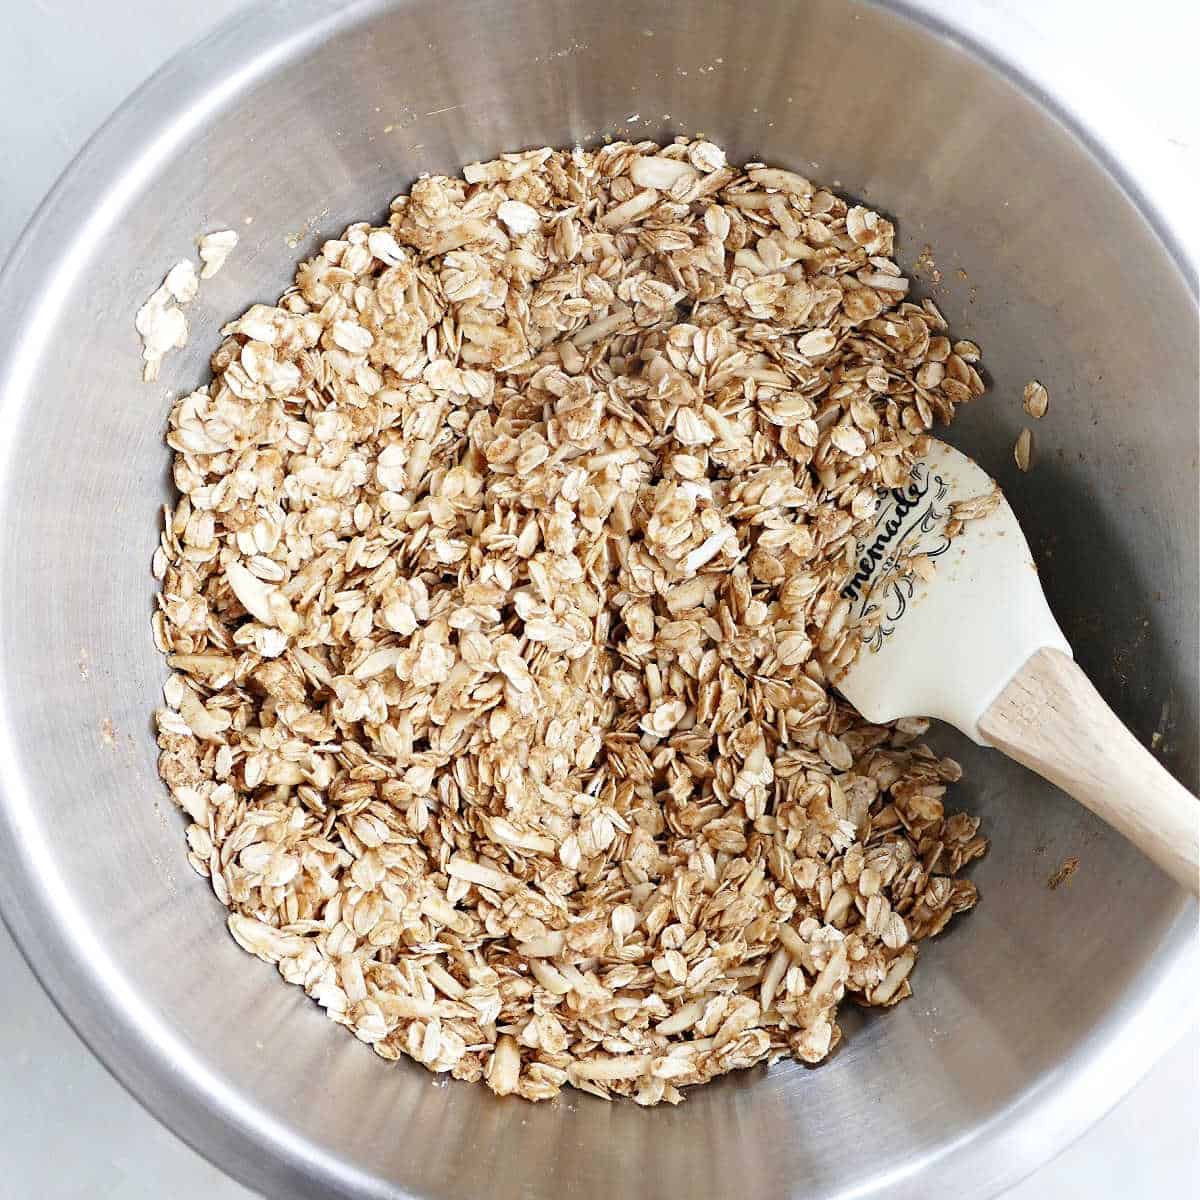 ingredients for almond granola being mixed together with a rubber spatula